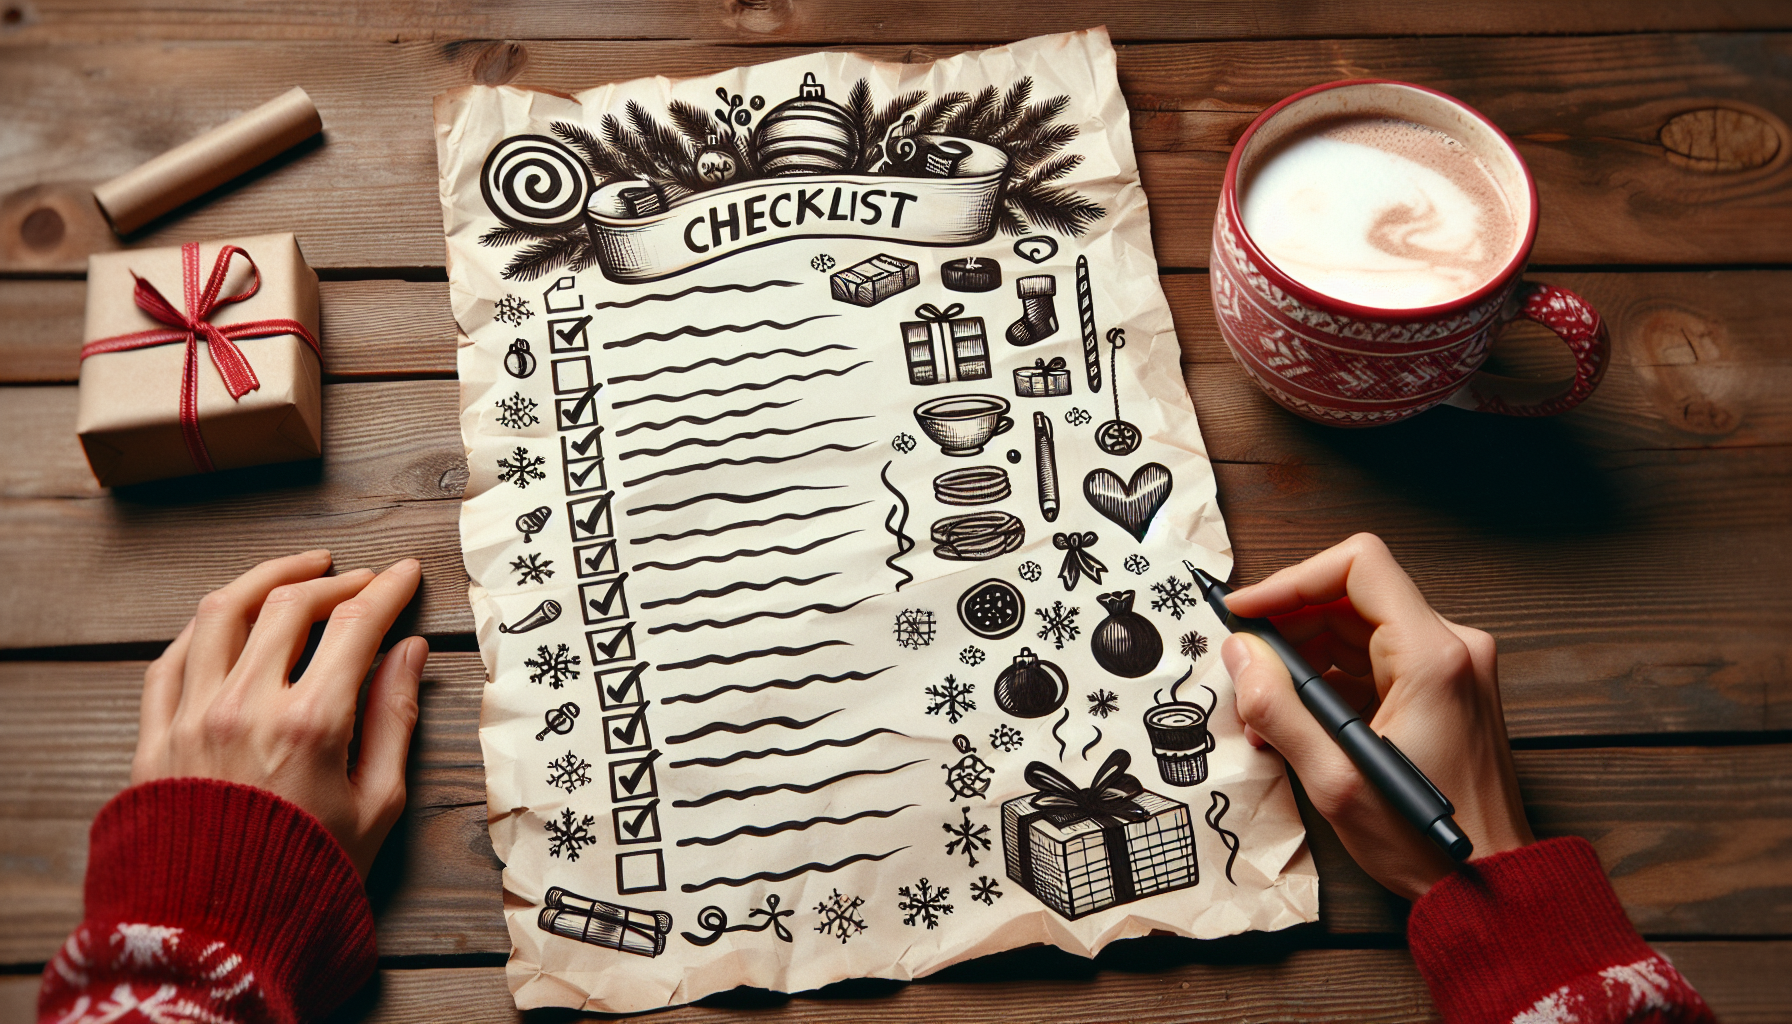 Crafting a focused holiday to-do list to stay organized